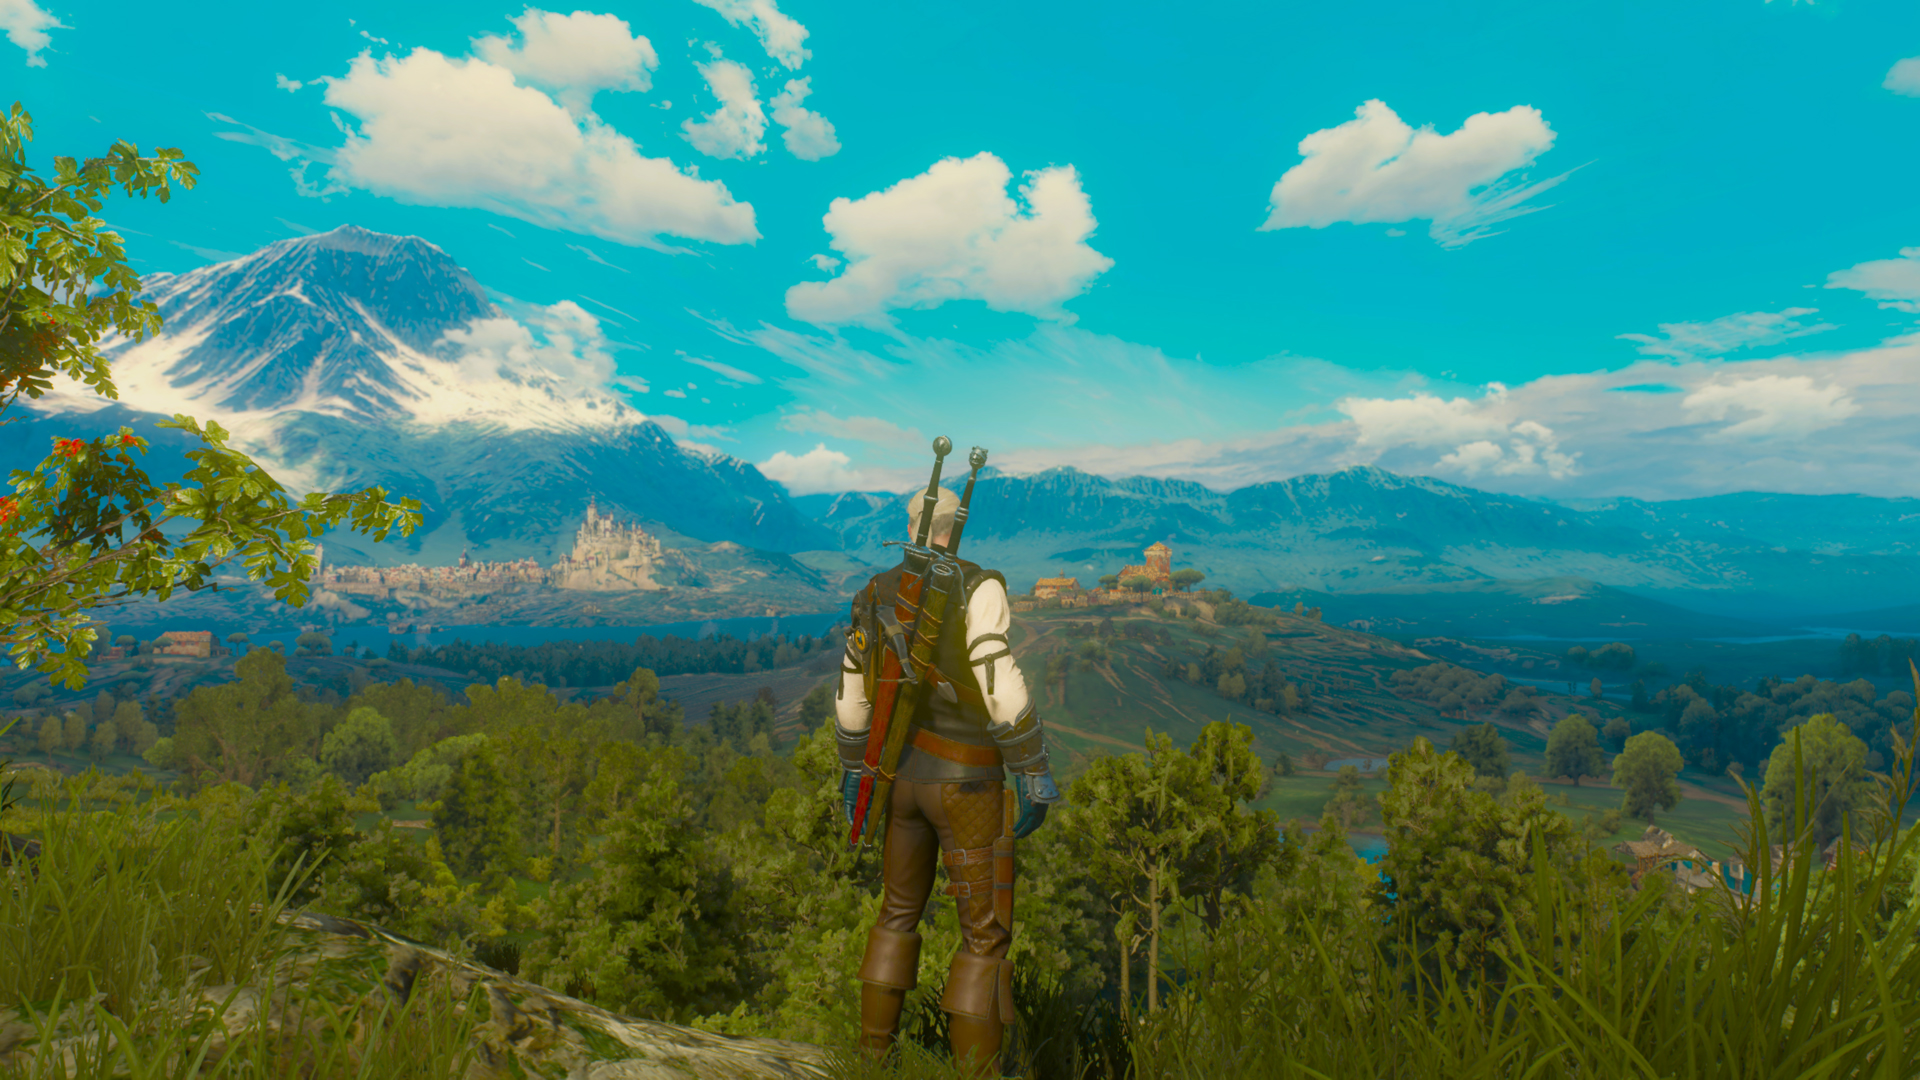 Witcher 3 Touissaint - view and render distance on Xbox One X